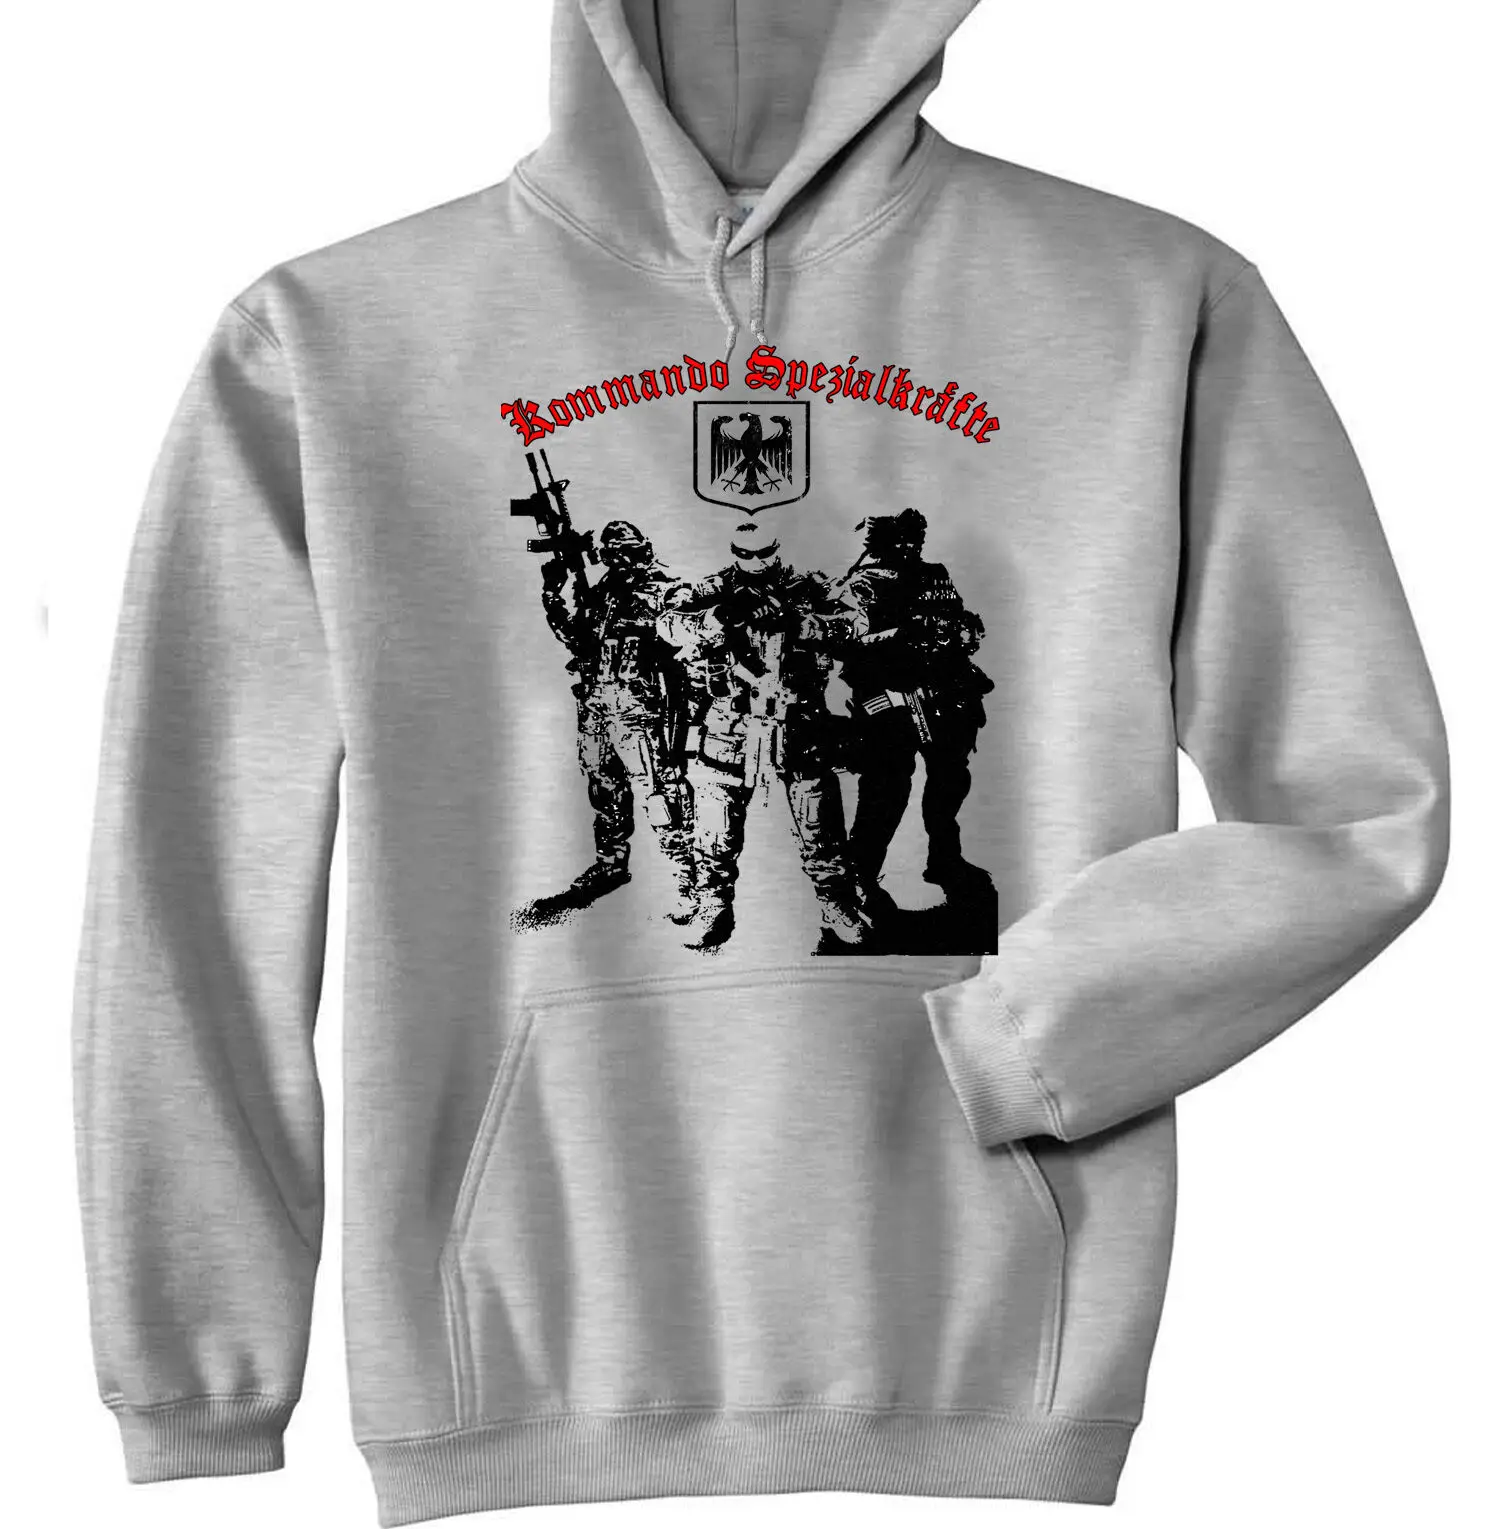 

2020 KSK GERMAN SPECIAL FORCES NEW COTTON GREY Men HOODIE ALL SIZES IN STOCK